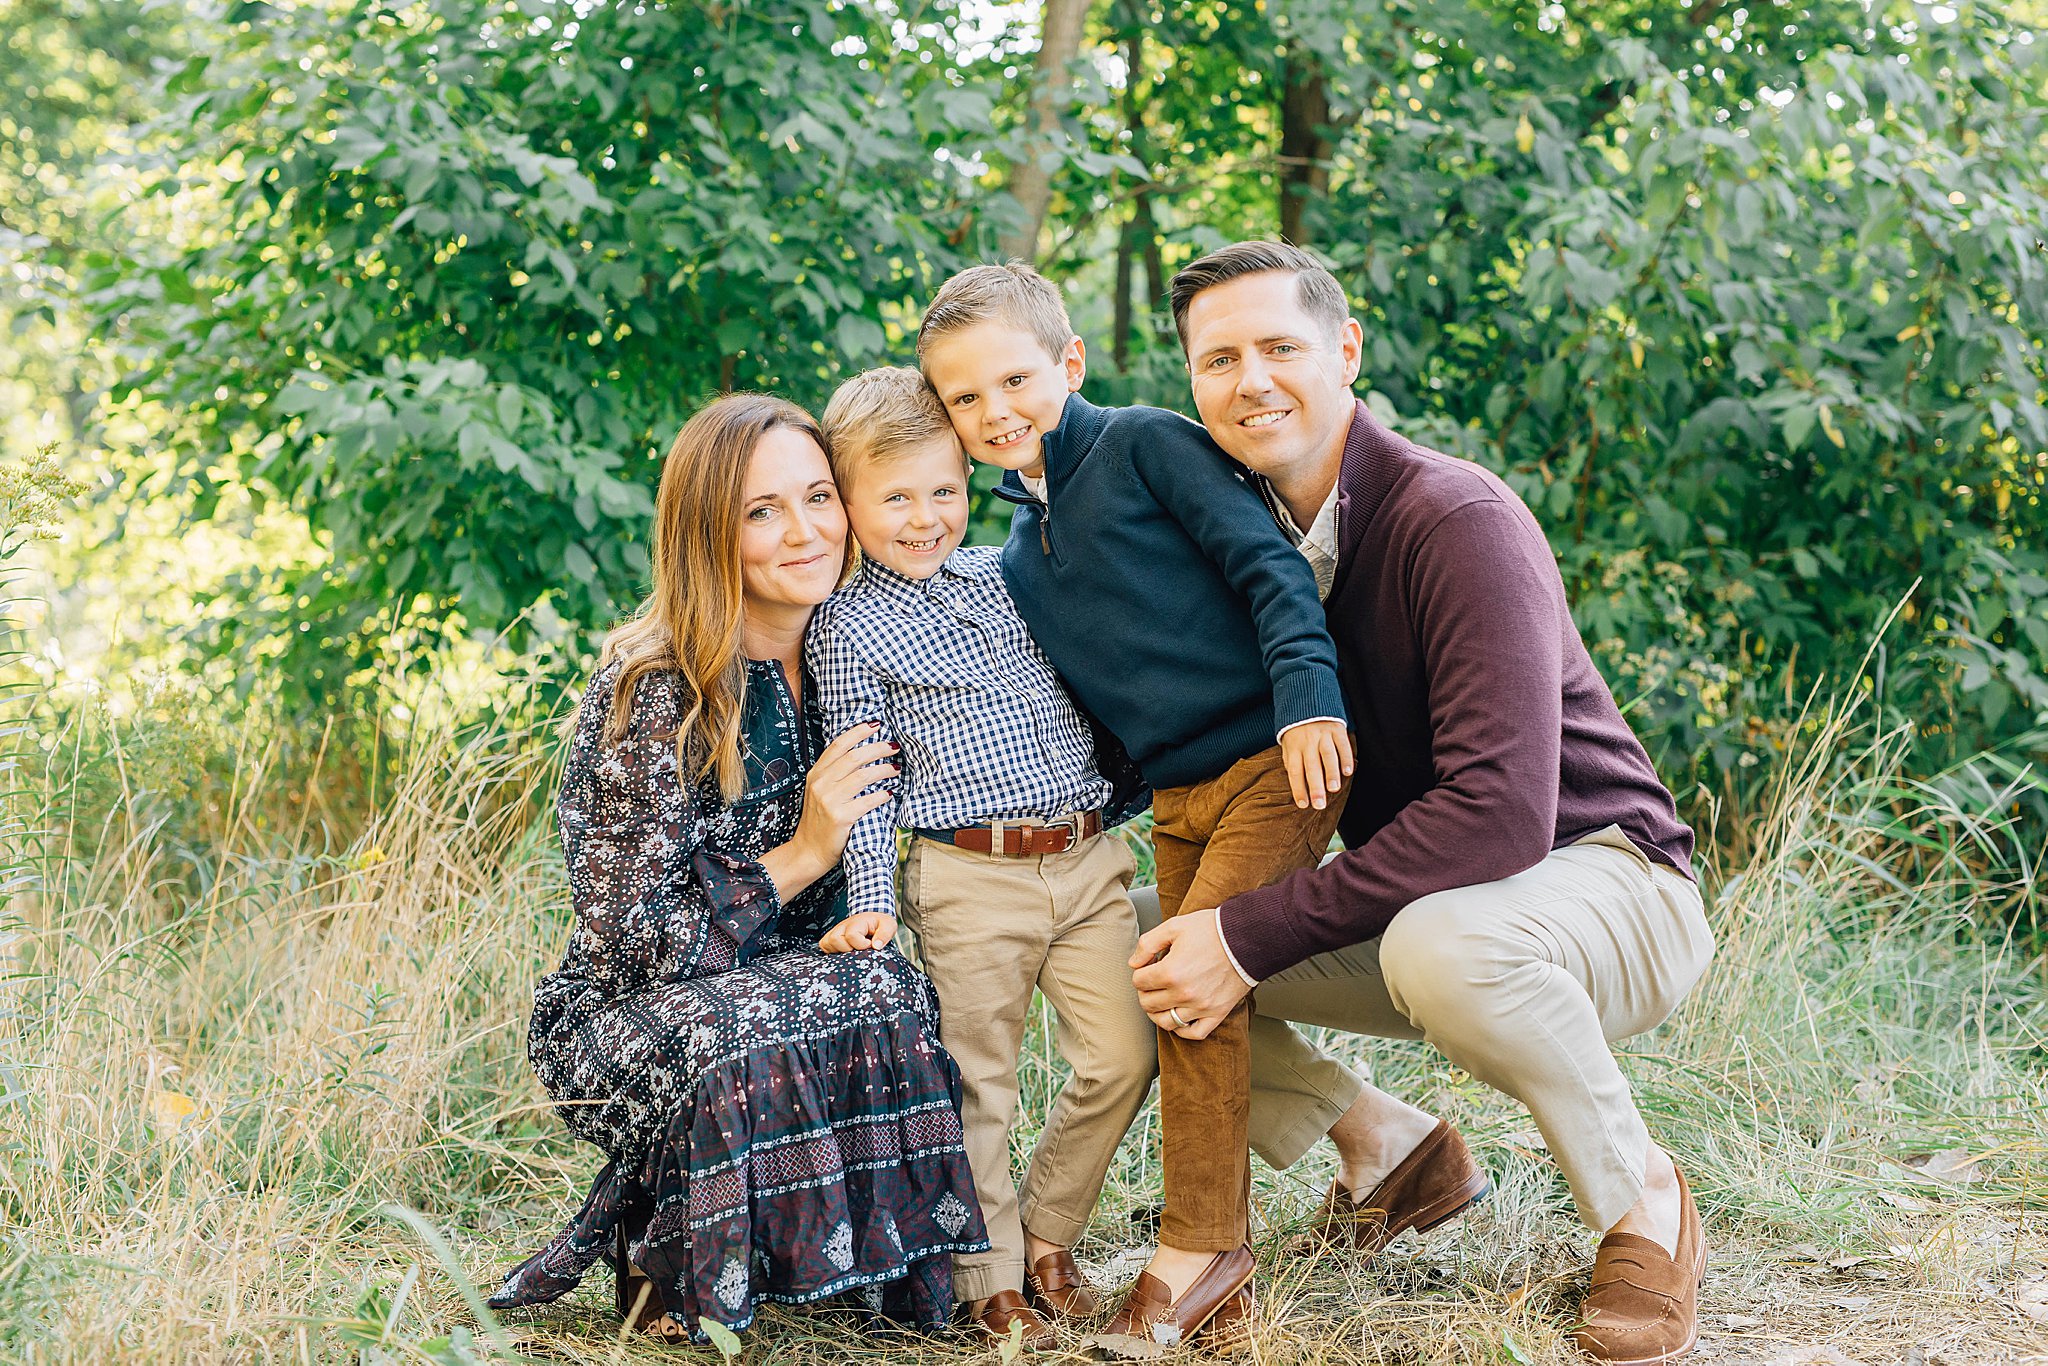 Two boys, mom and dad kneeling and smiling during family pictures with boys.